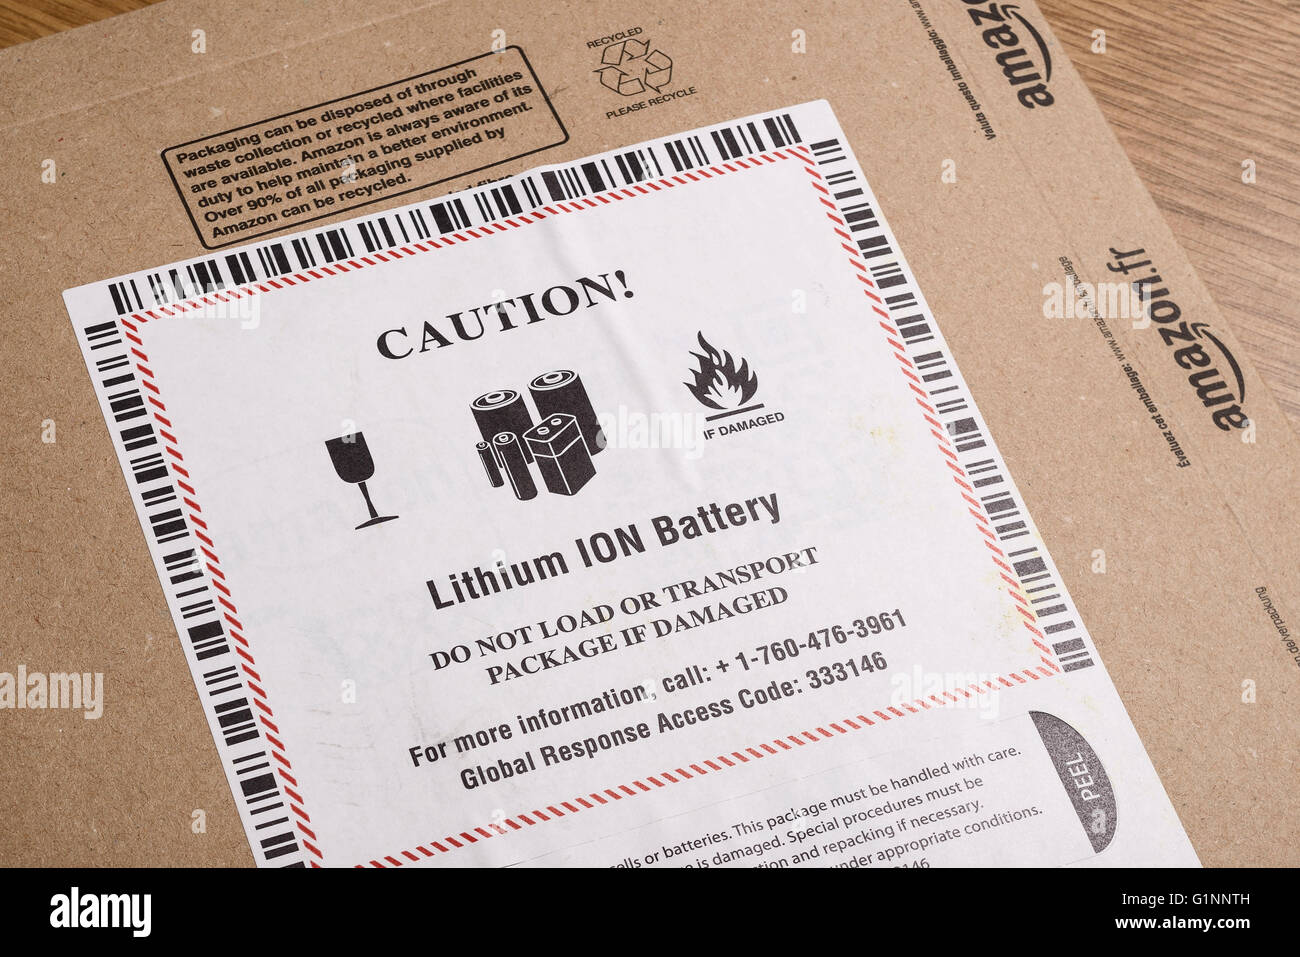 Warning label on an Amazon package for a Lithium Ion battery Stock Photo